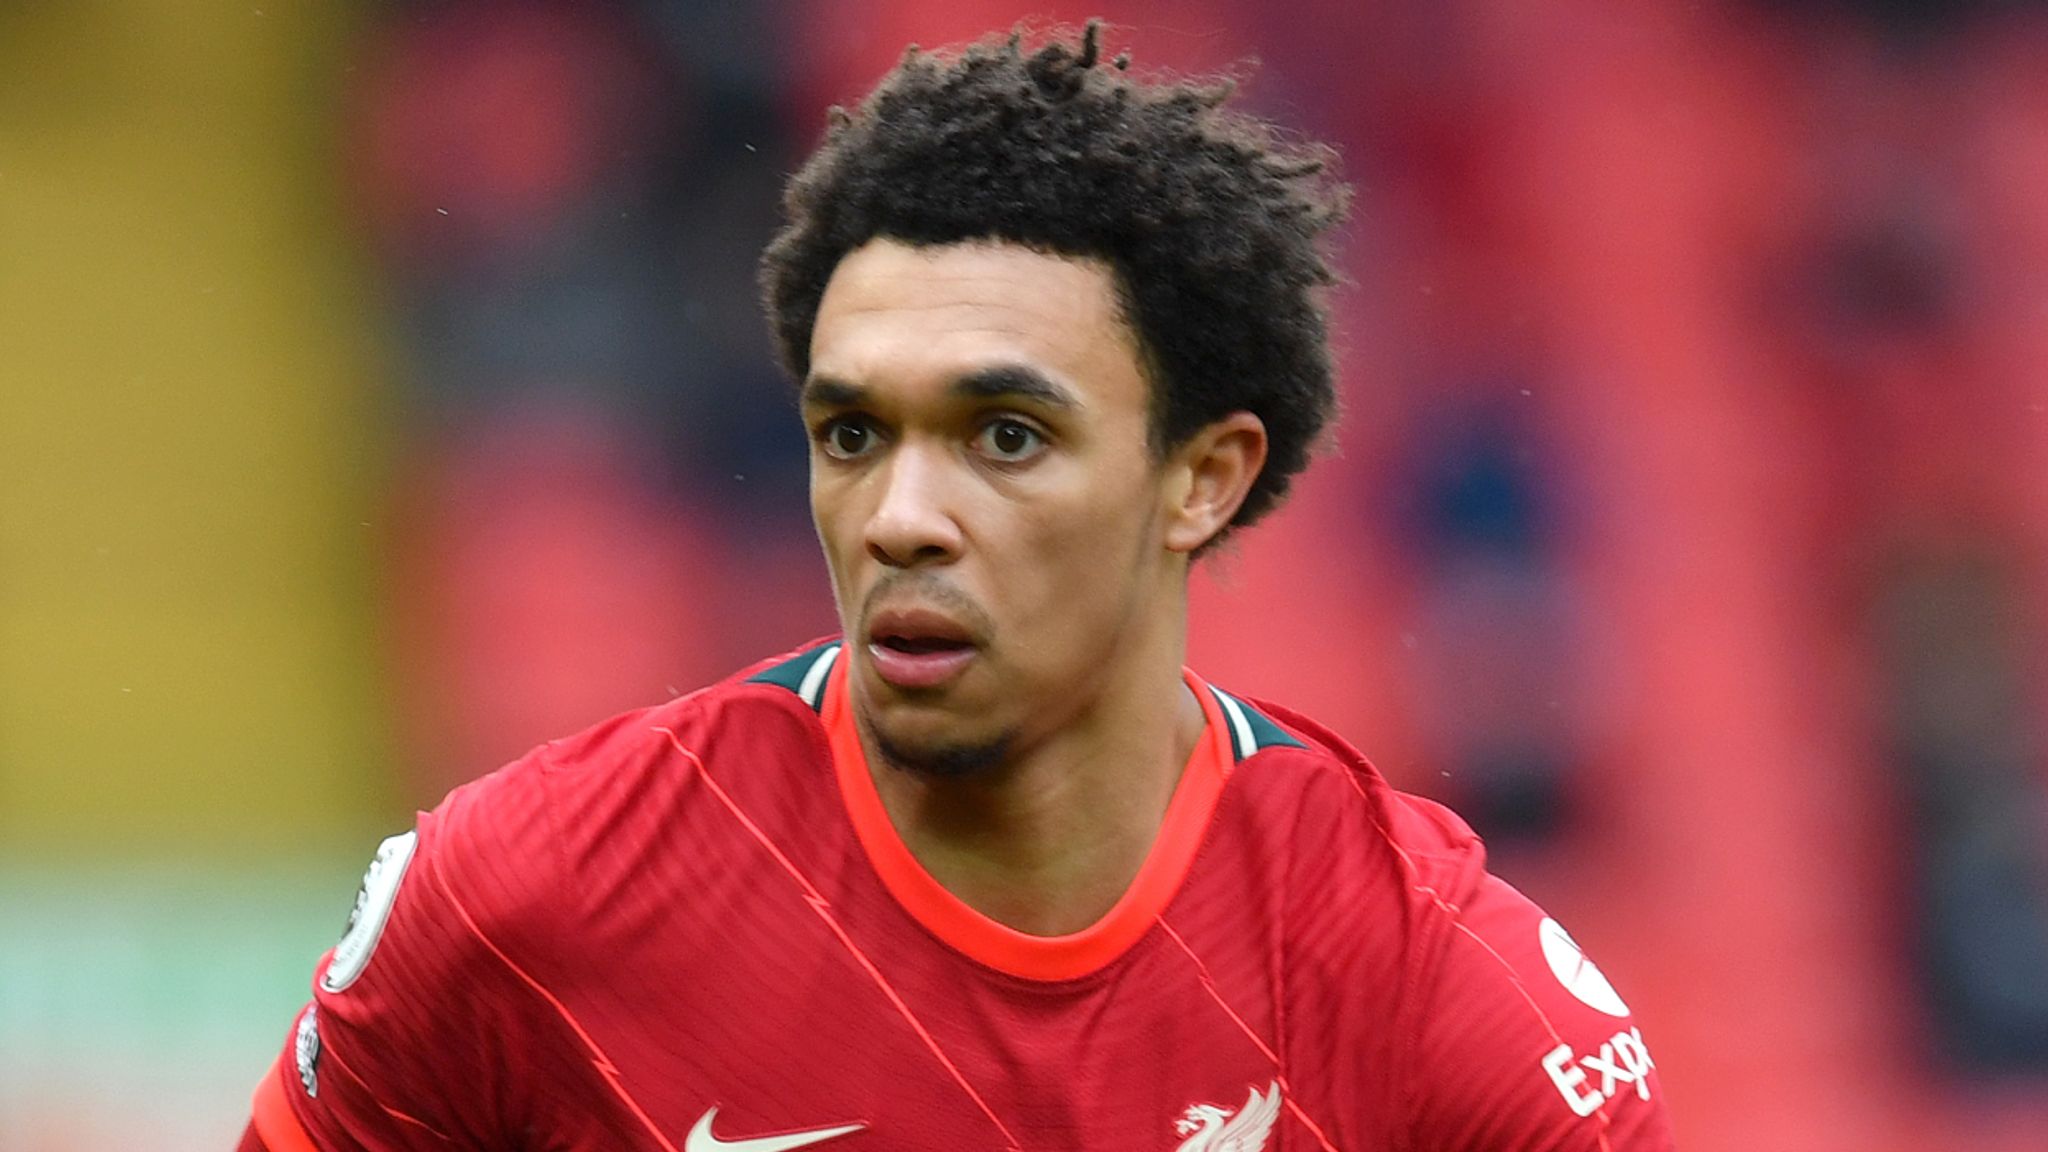 Roy Keane and Ian Wright react Gareth Southgate moves Trent Alexander-Arnold in Midfield England’s World Cup!